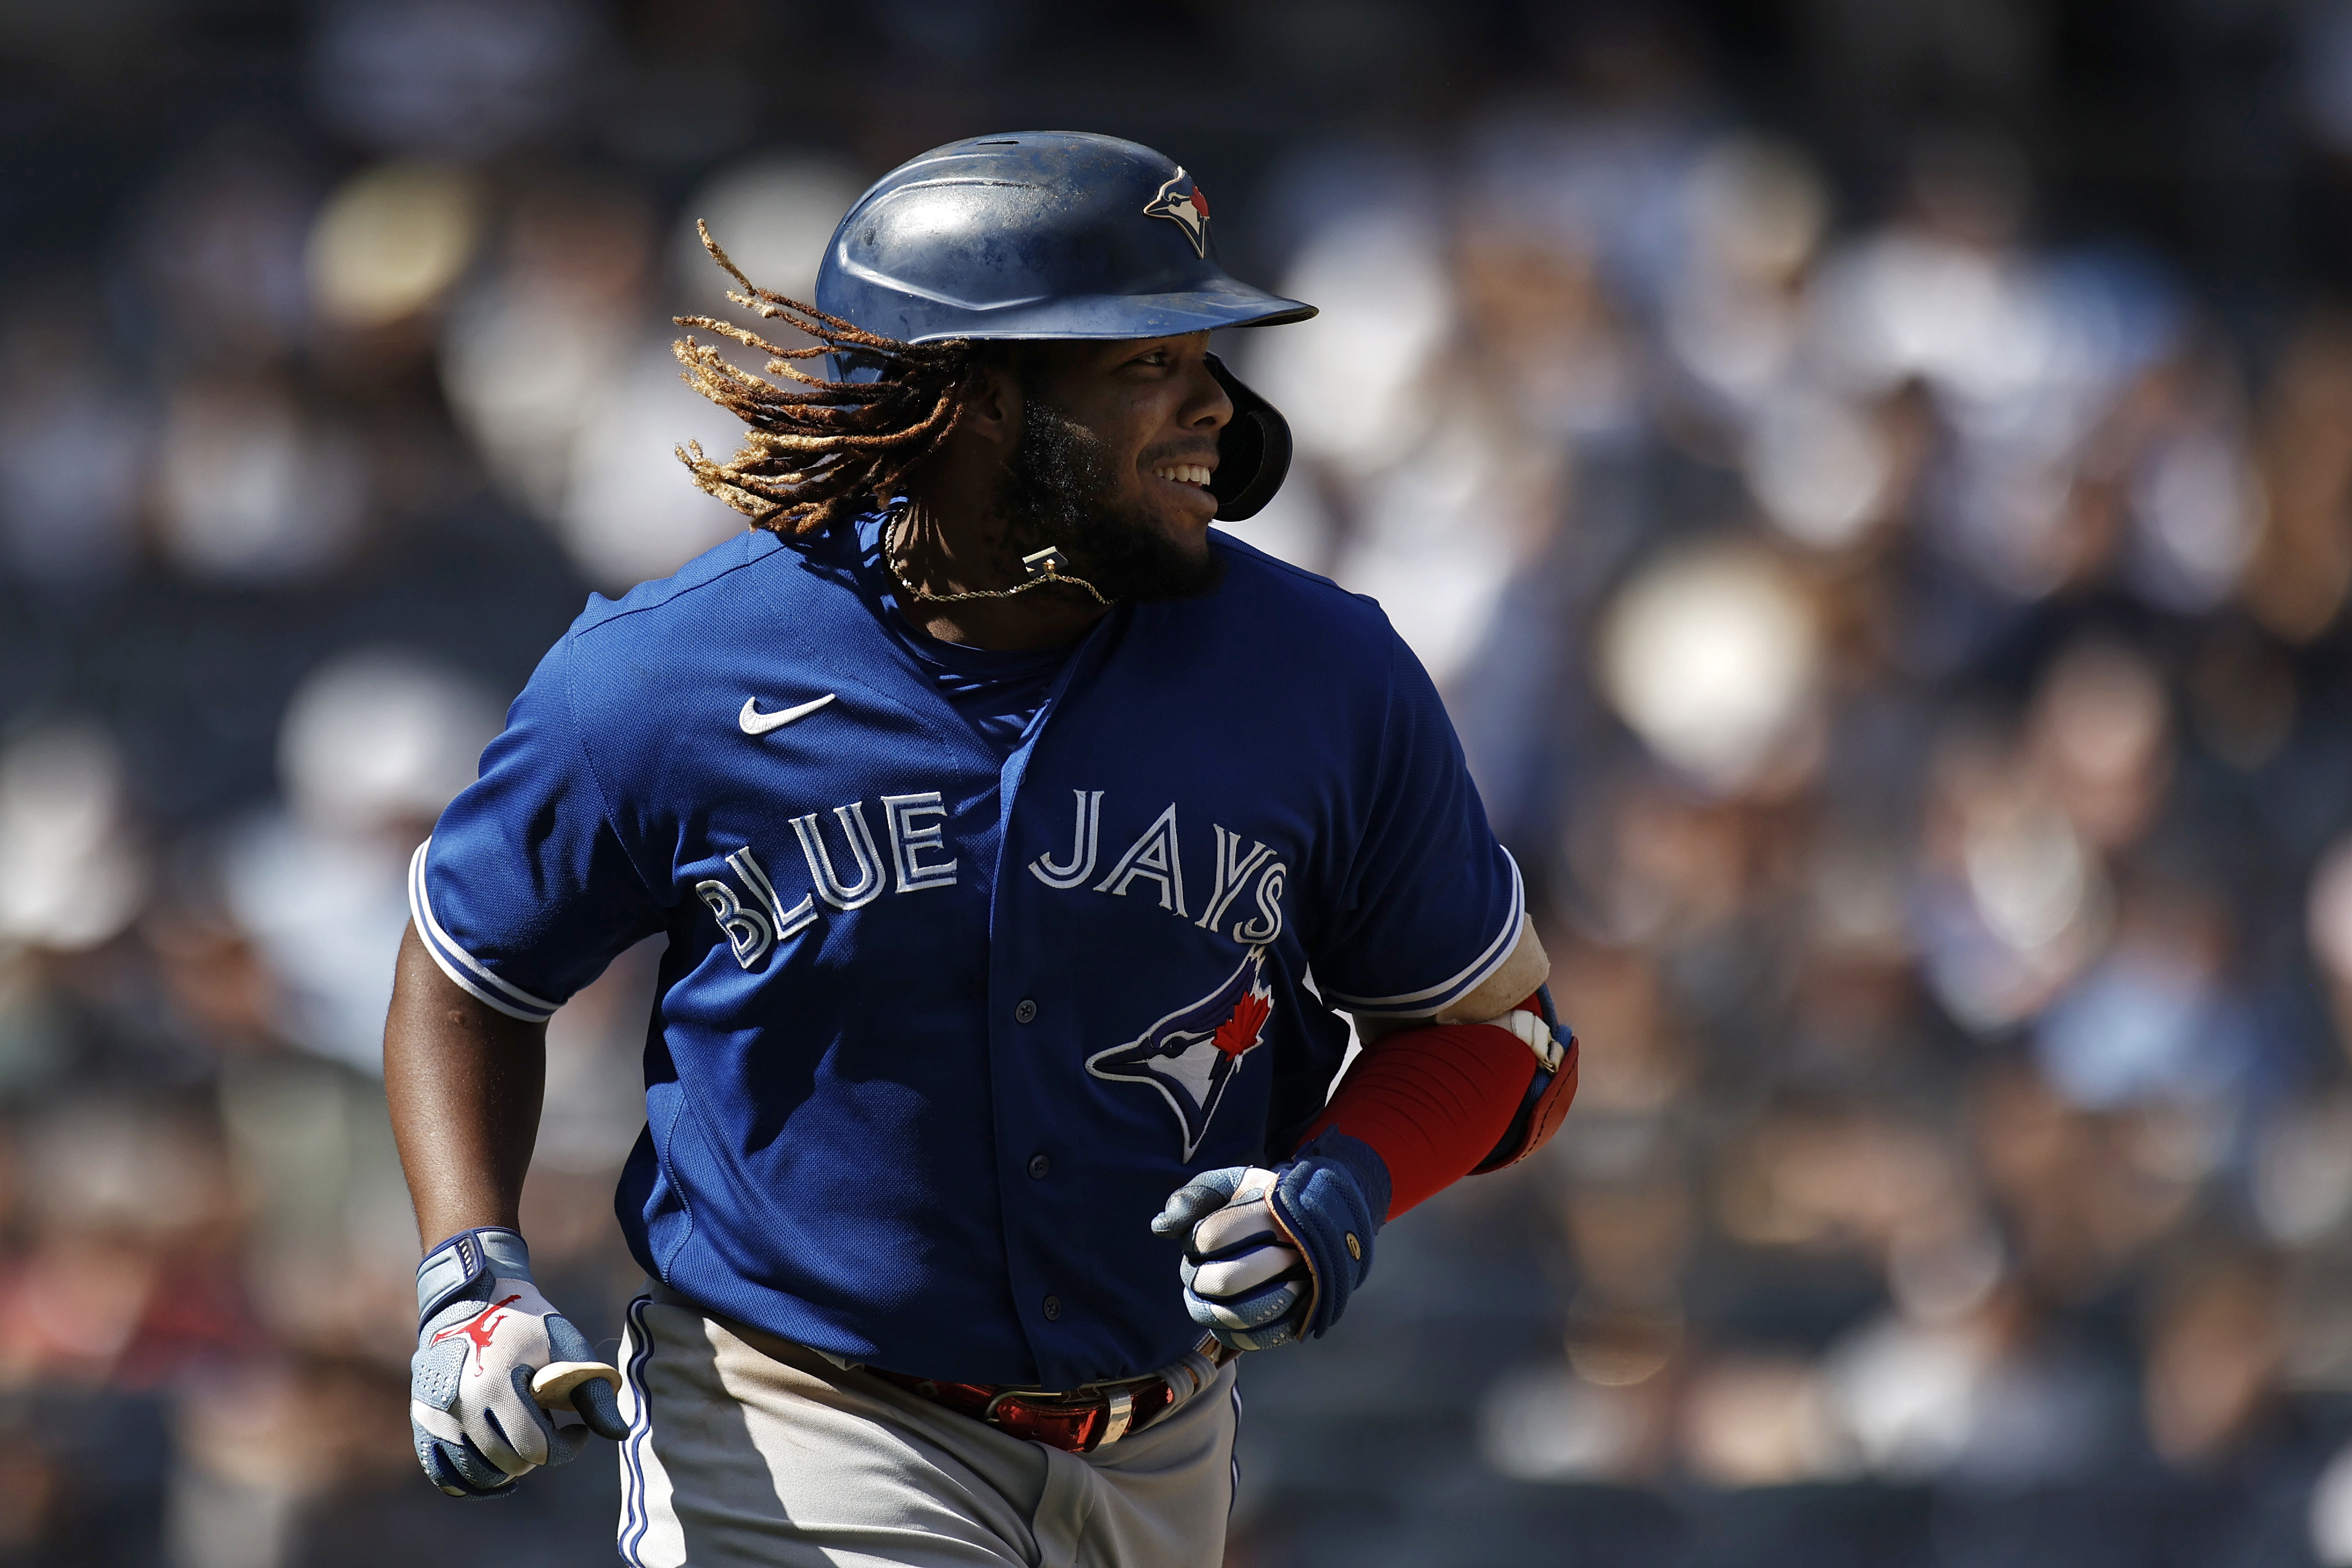 Guerrero drives in 2, Bichette has 2 hits in return from injury